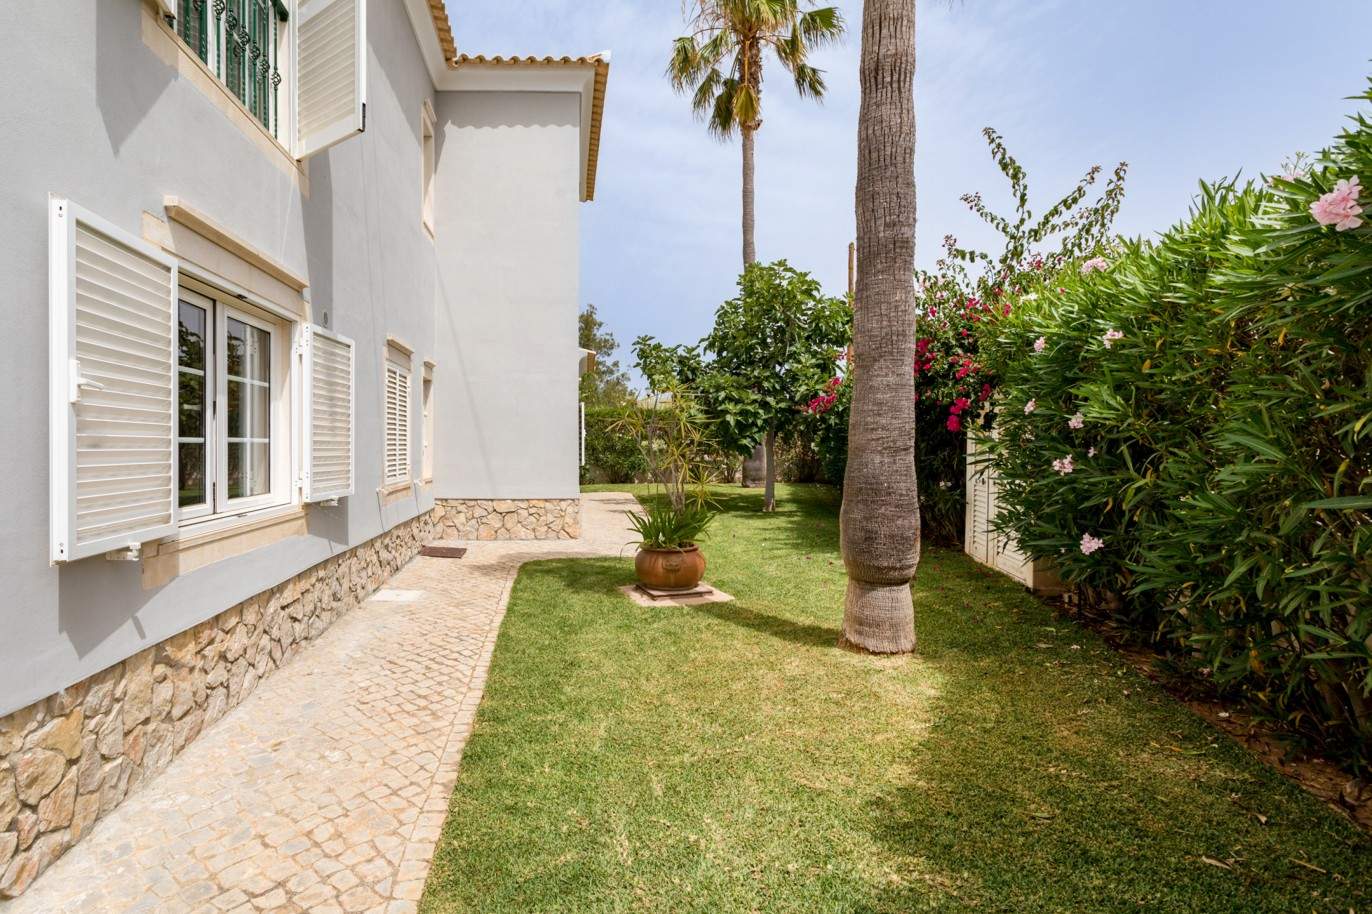 4 Bedroom Villa with swimming pool, for sale in Quarteira, Algarve_201735